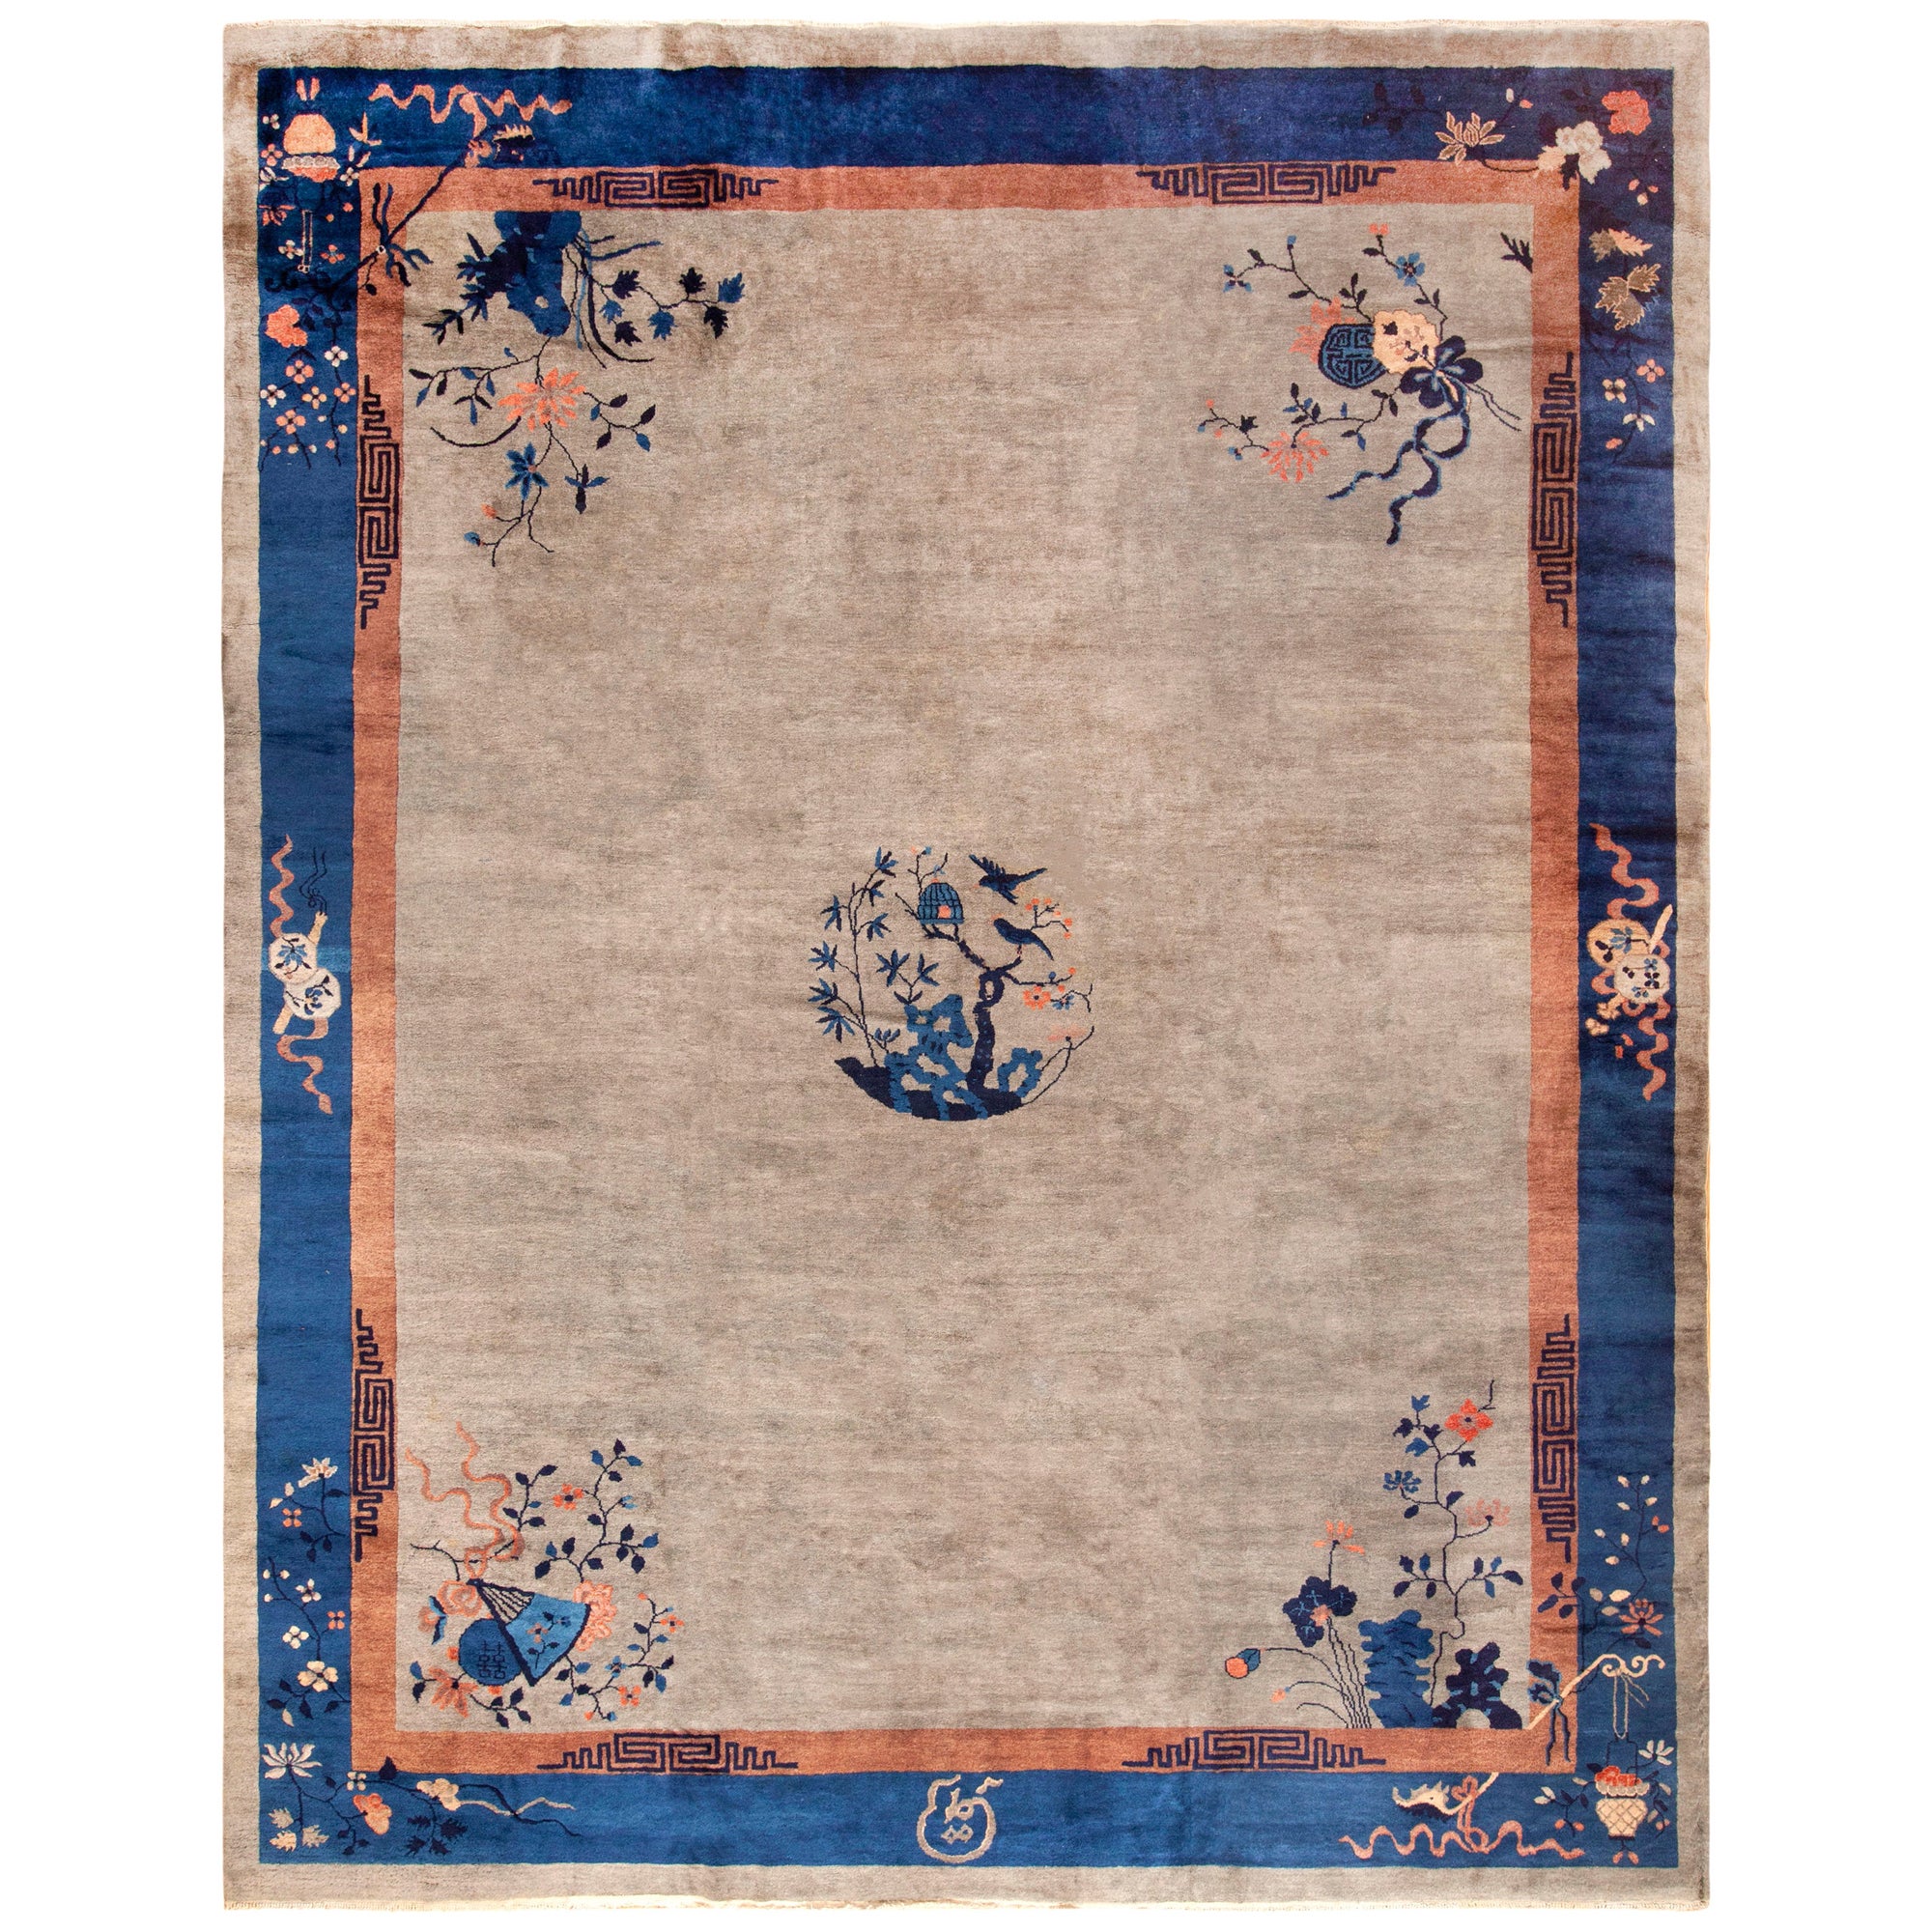 Magnificent Antique Chinese Art Deco Central Medallion Area Rug 12' x 14'6" For Sale